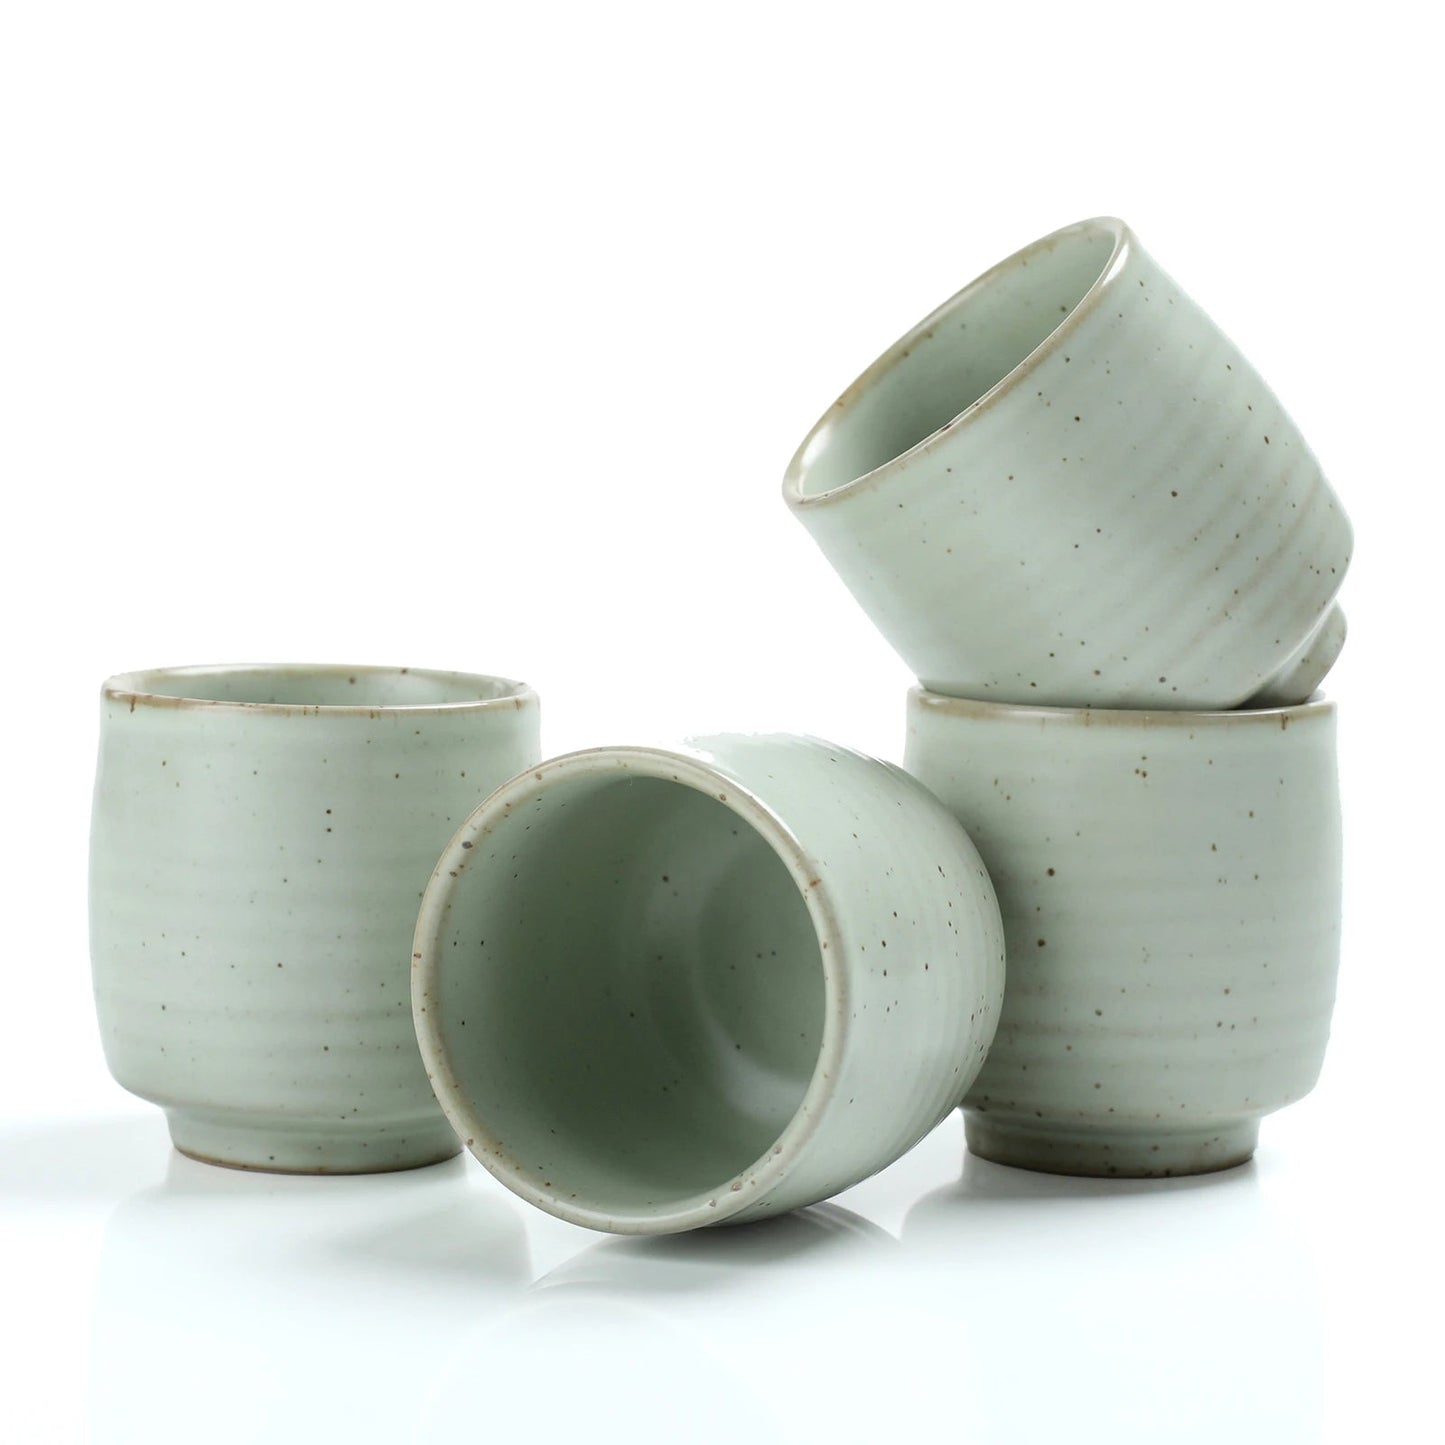 Pottery Chinese Tea Cups, 4 pcs/Box, Japan Style Teacups